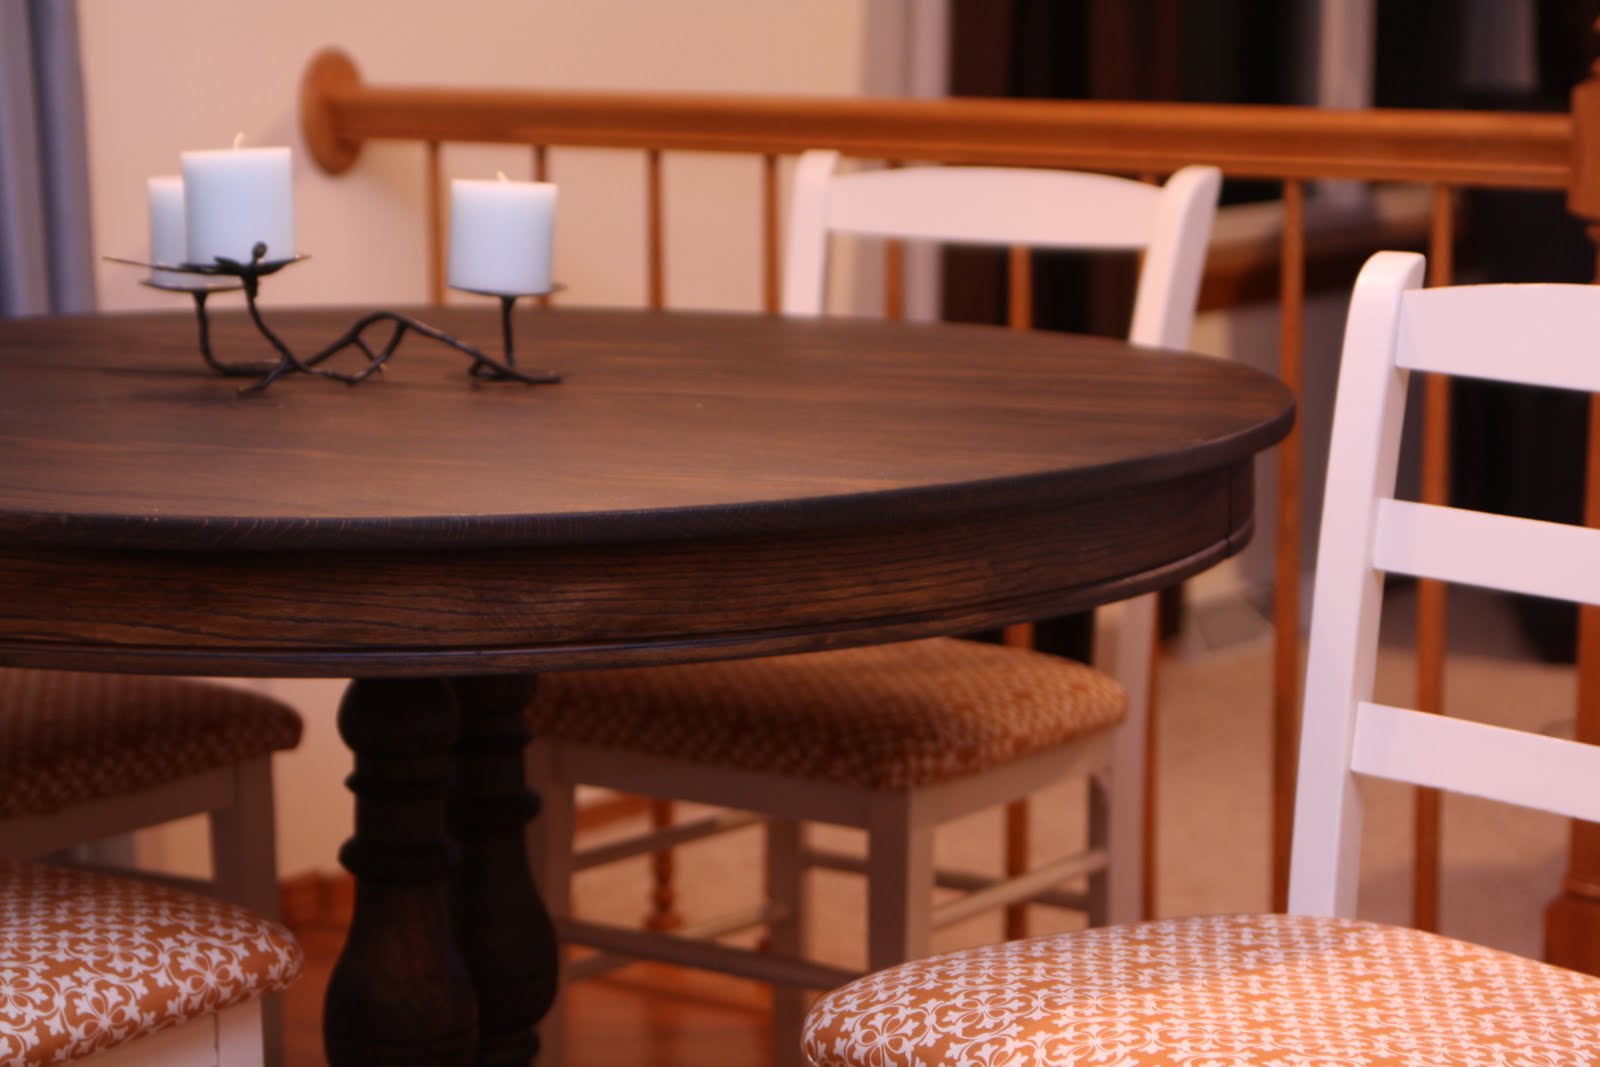 Decorating the Dorchester Way: Refinished Dining Room Table and Chairs